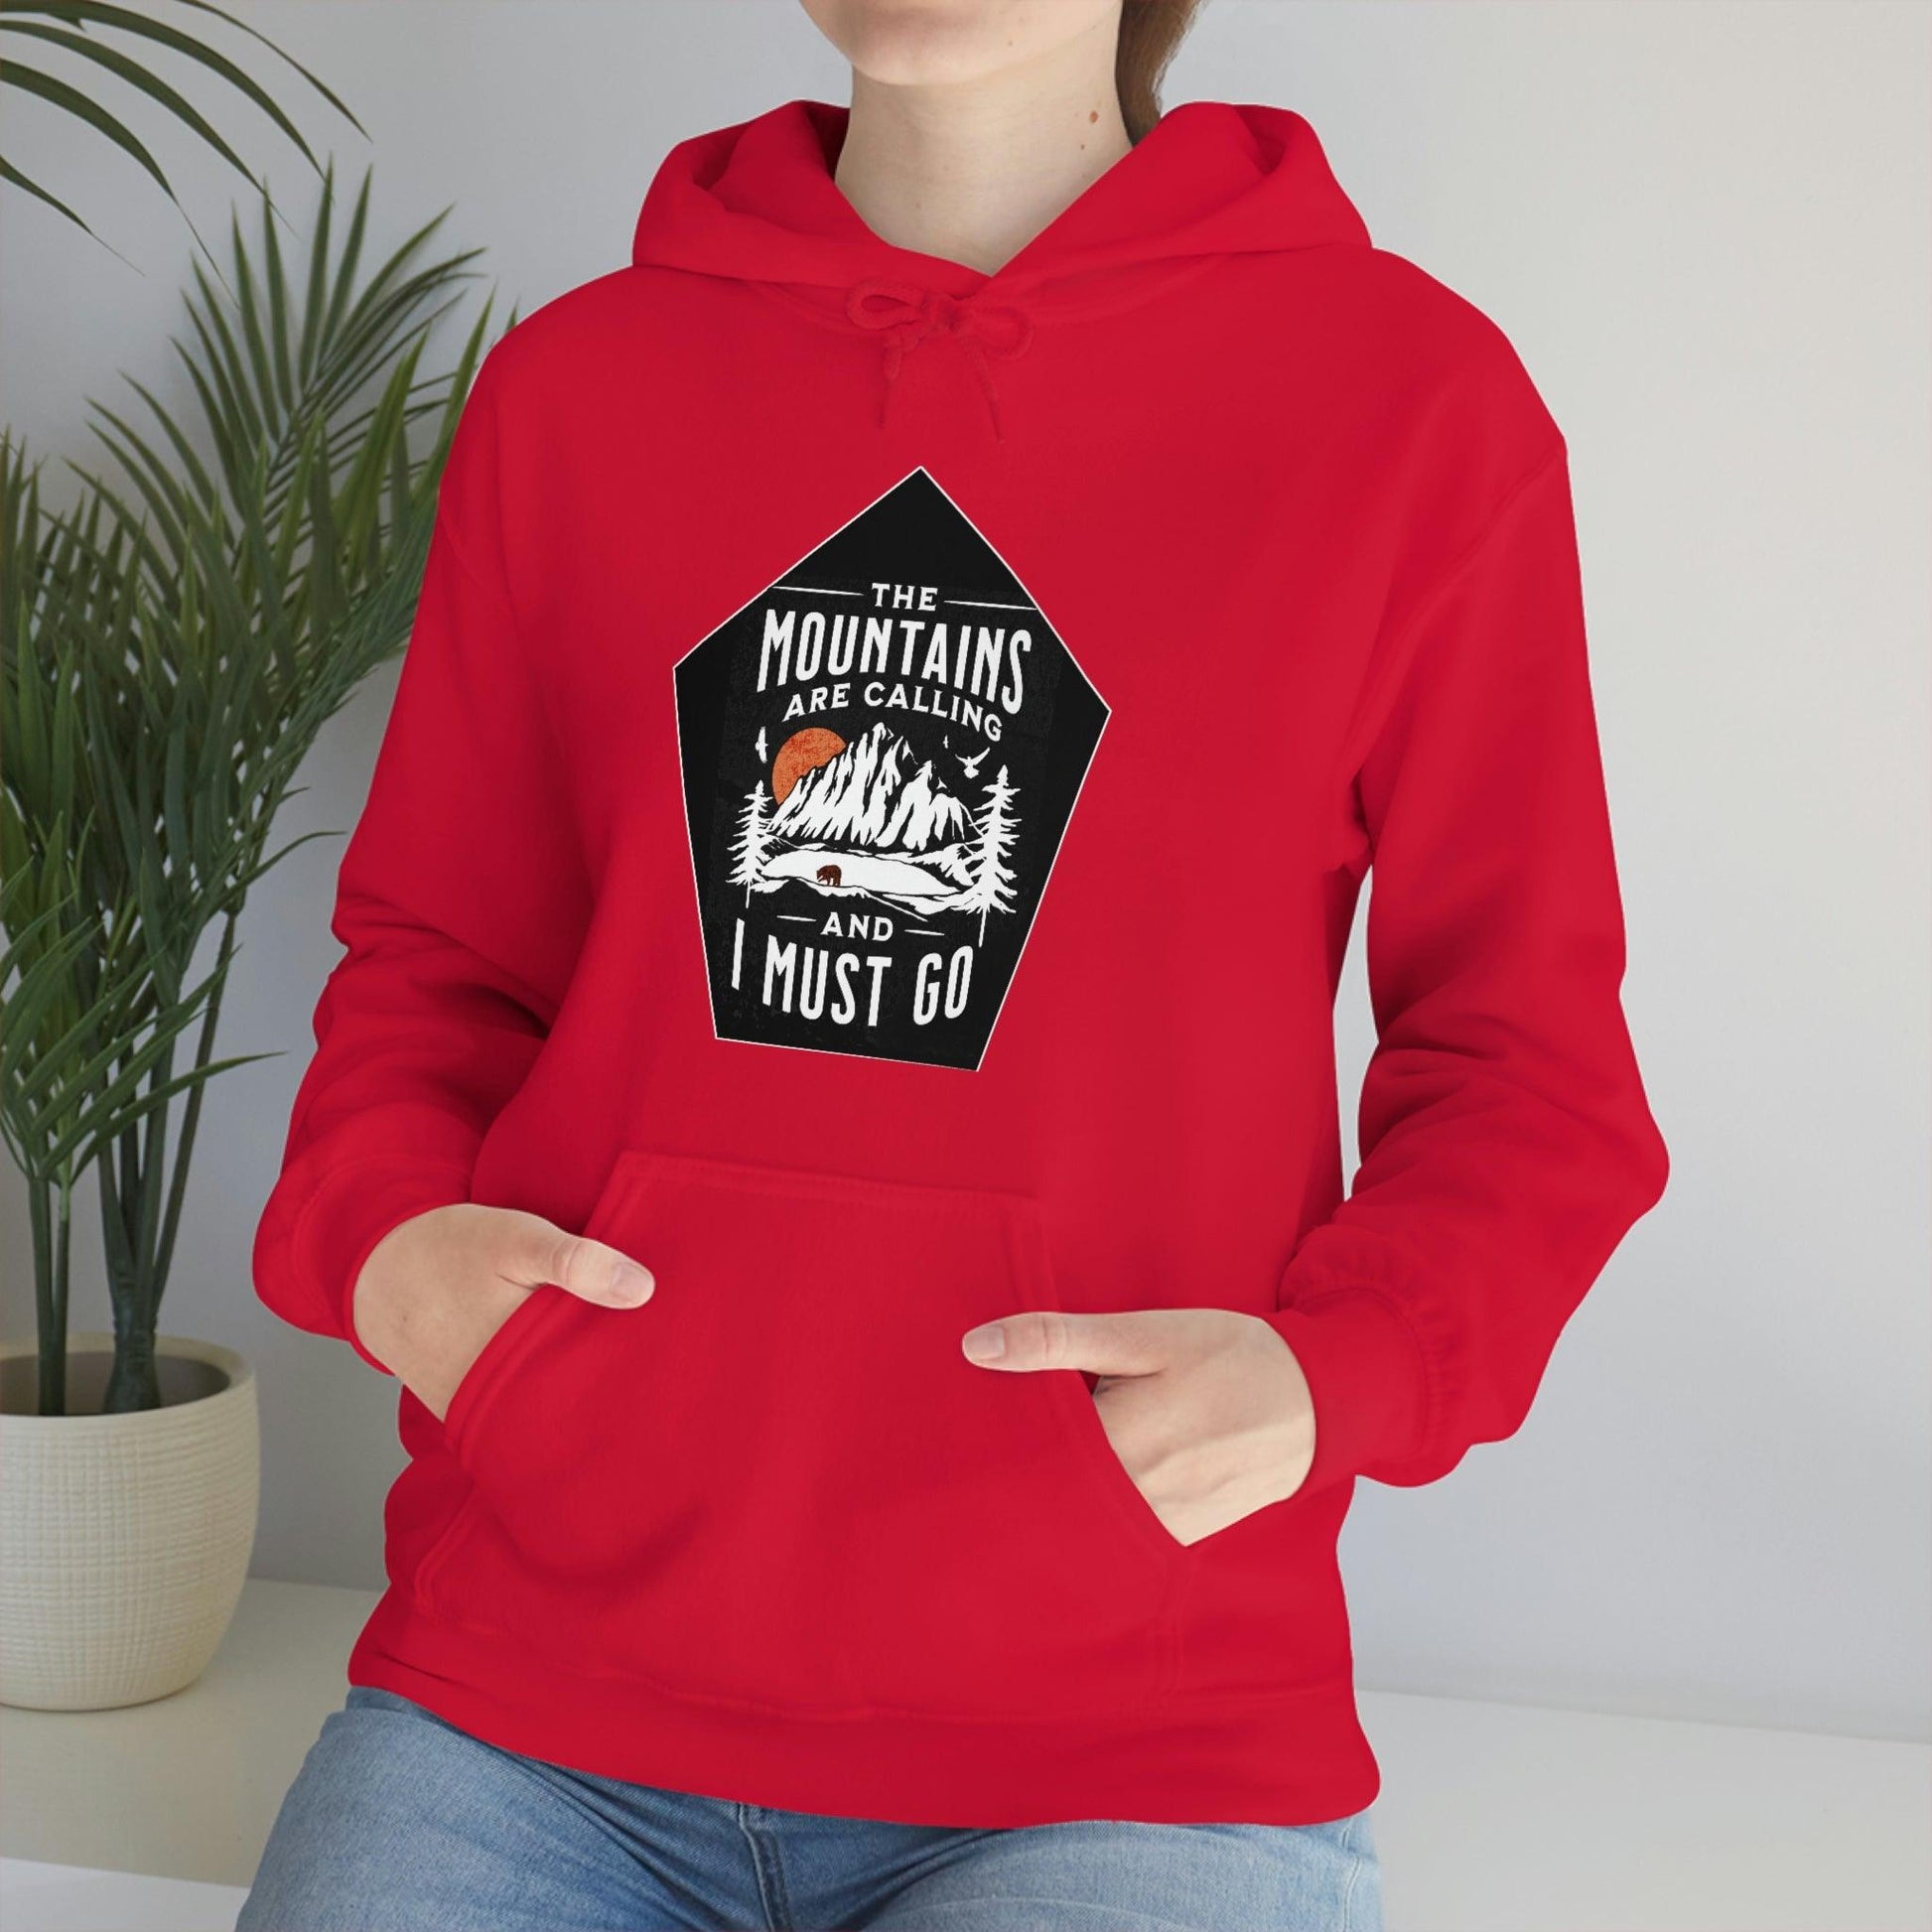 The Mountains are Calling and I Must Go, Hooded Sweatshirt - Giftsmojo